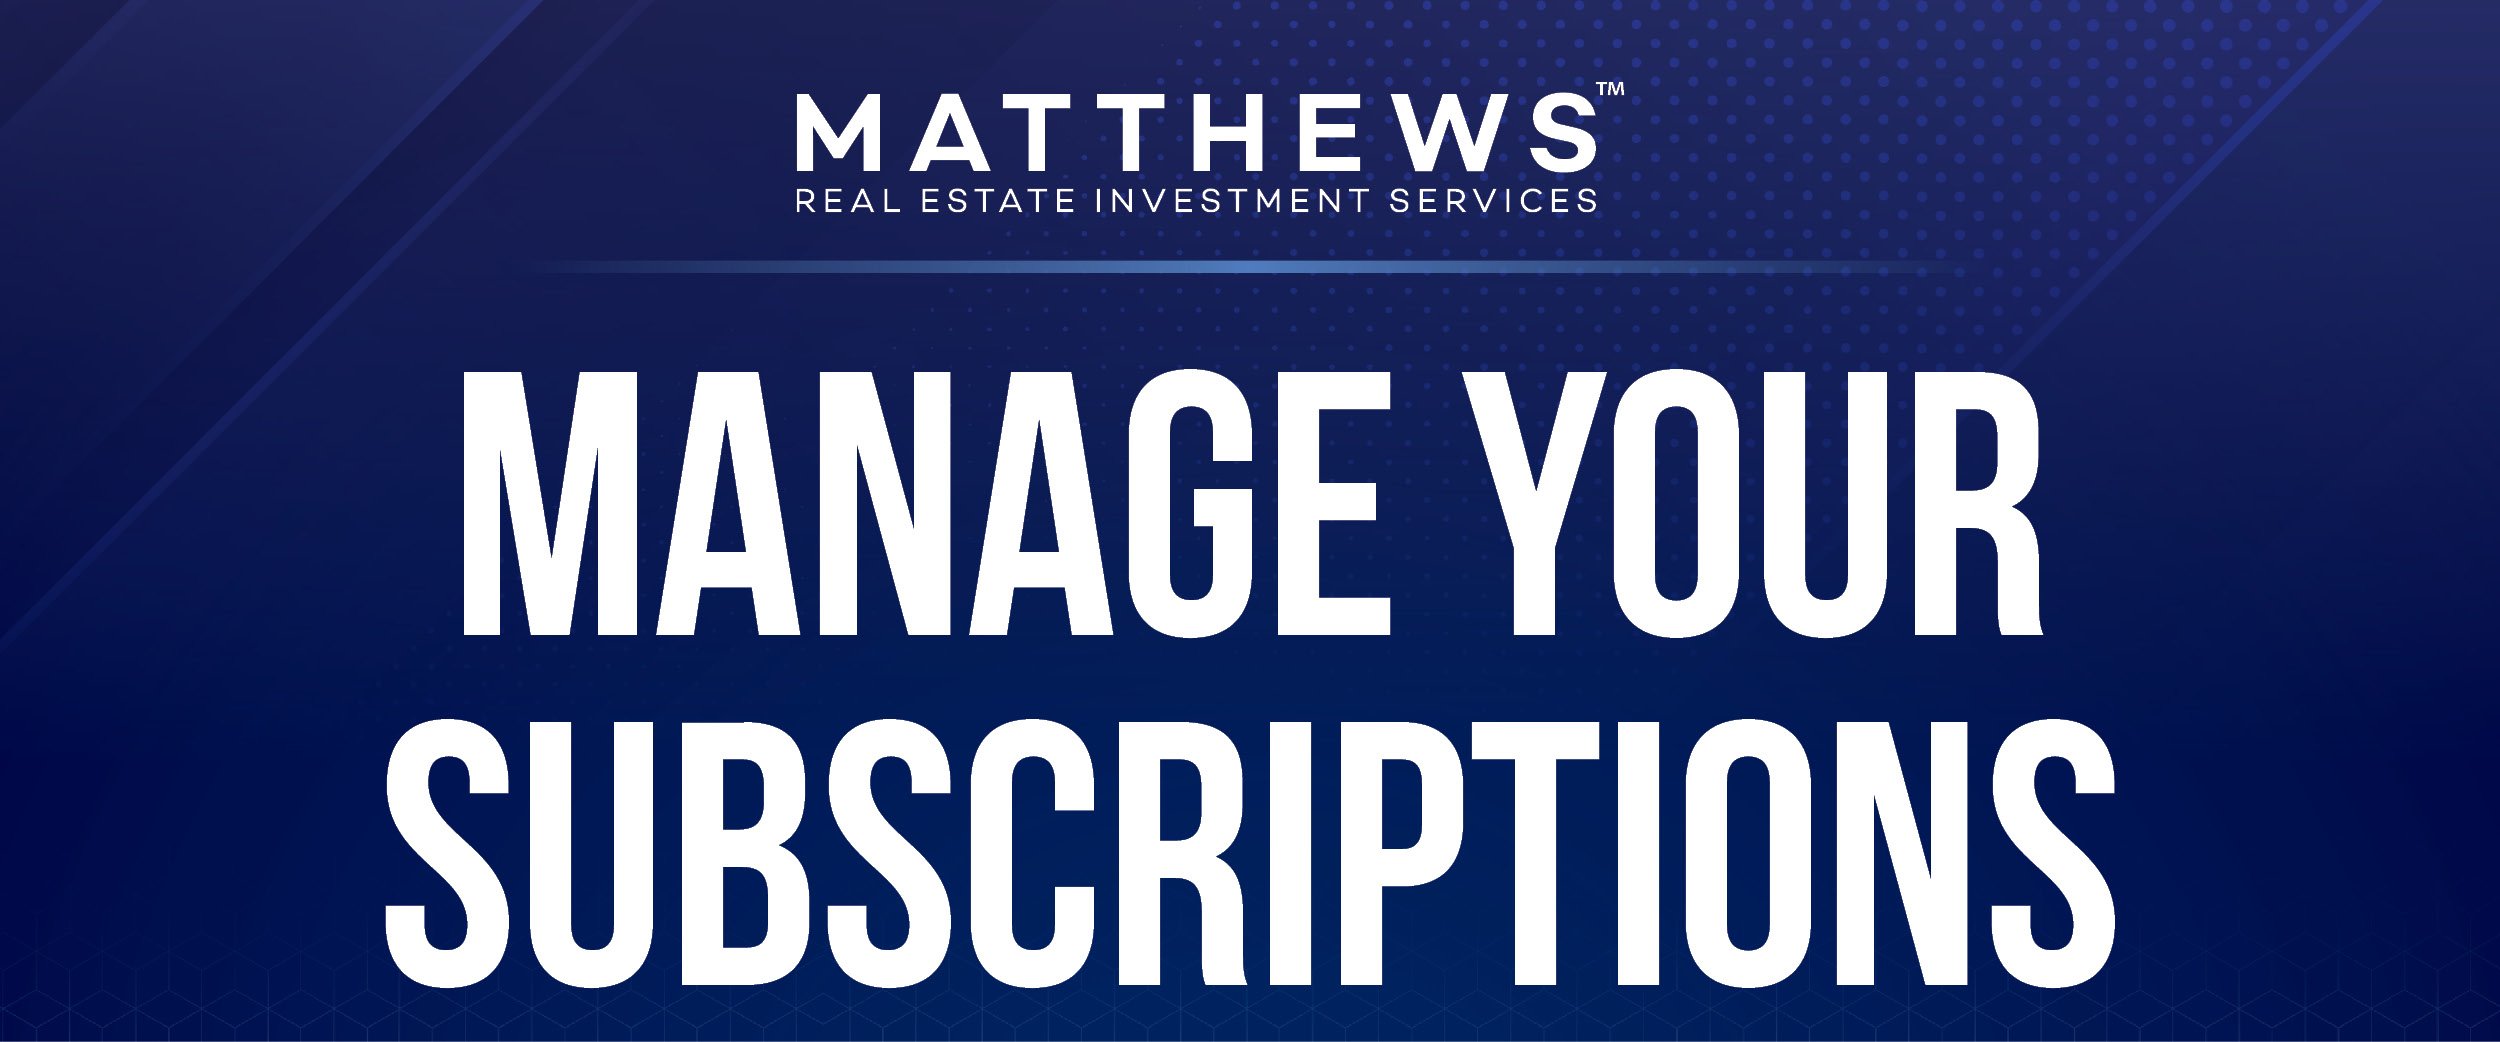 Email Subscriptions